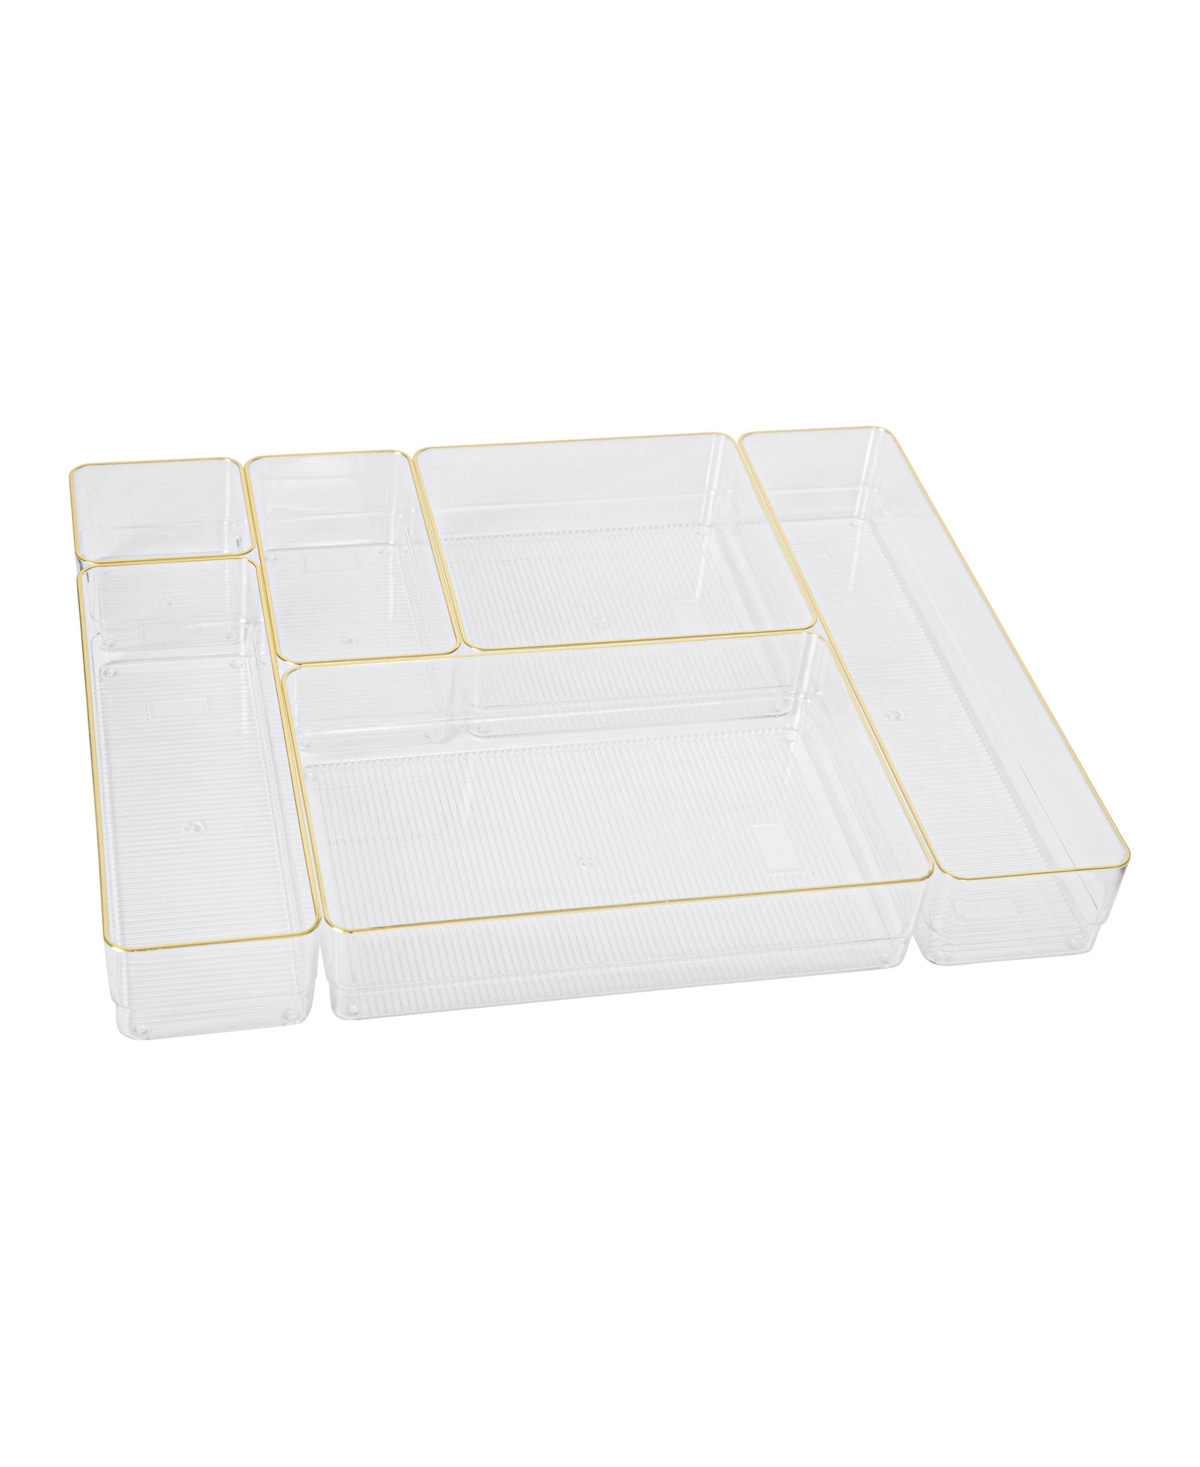 Martha Stewart Kerry Plastic Stackable Office Desk Drawer Organizers, 6 Compartments In Clear,gold Trim